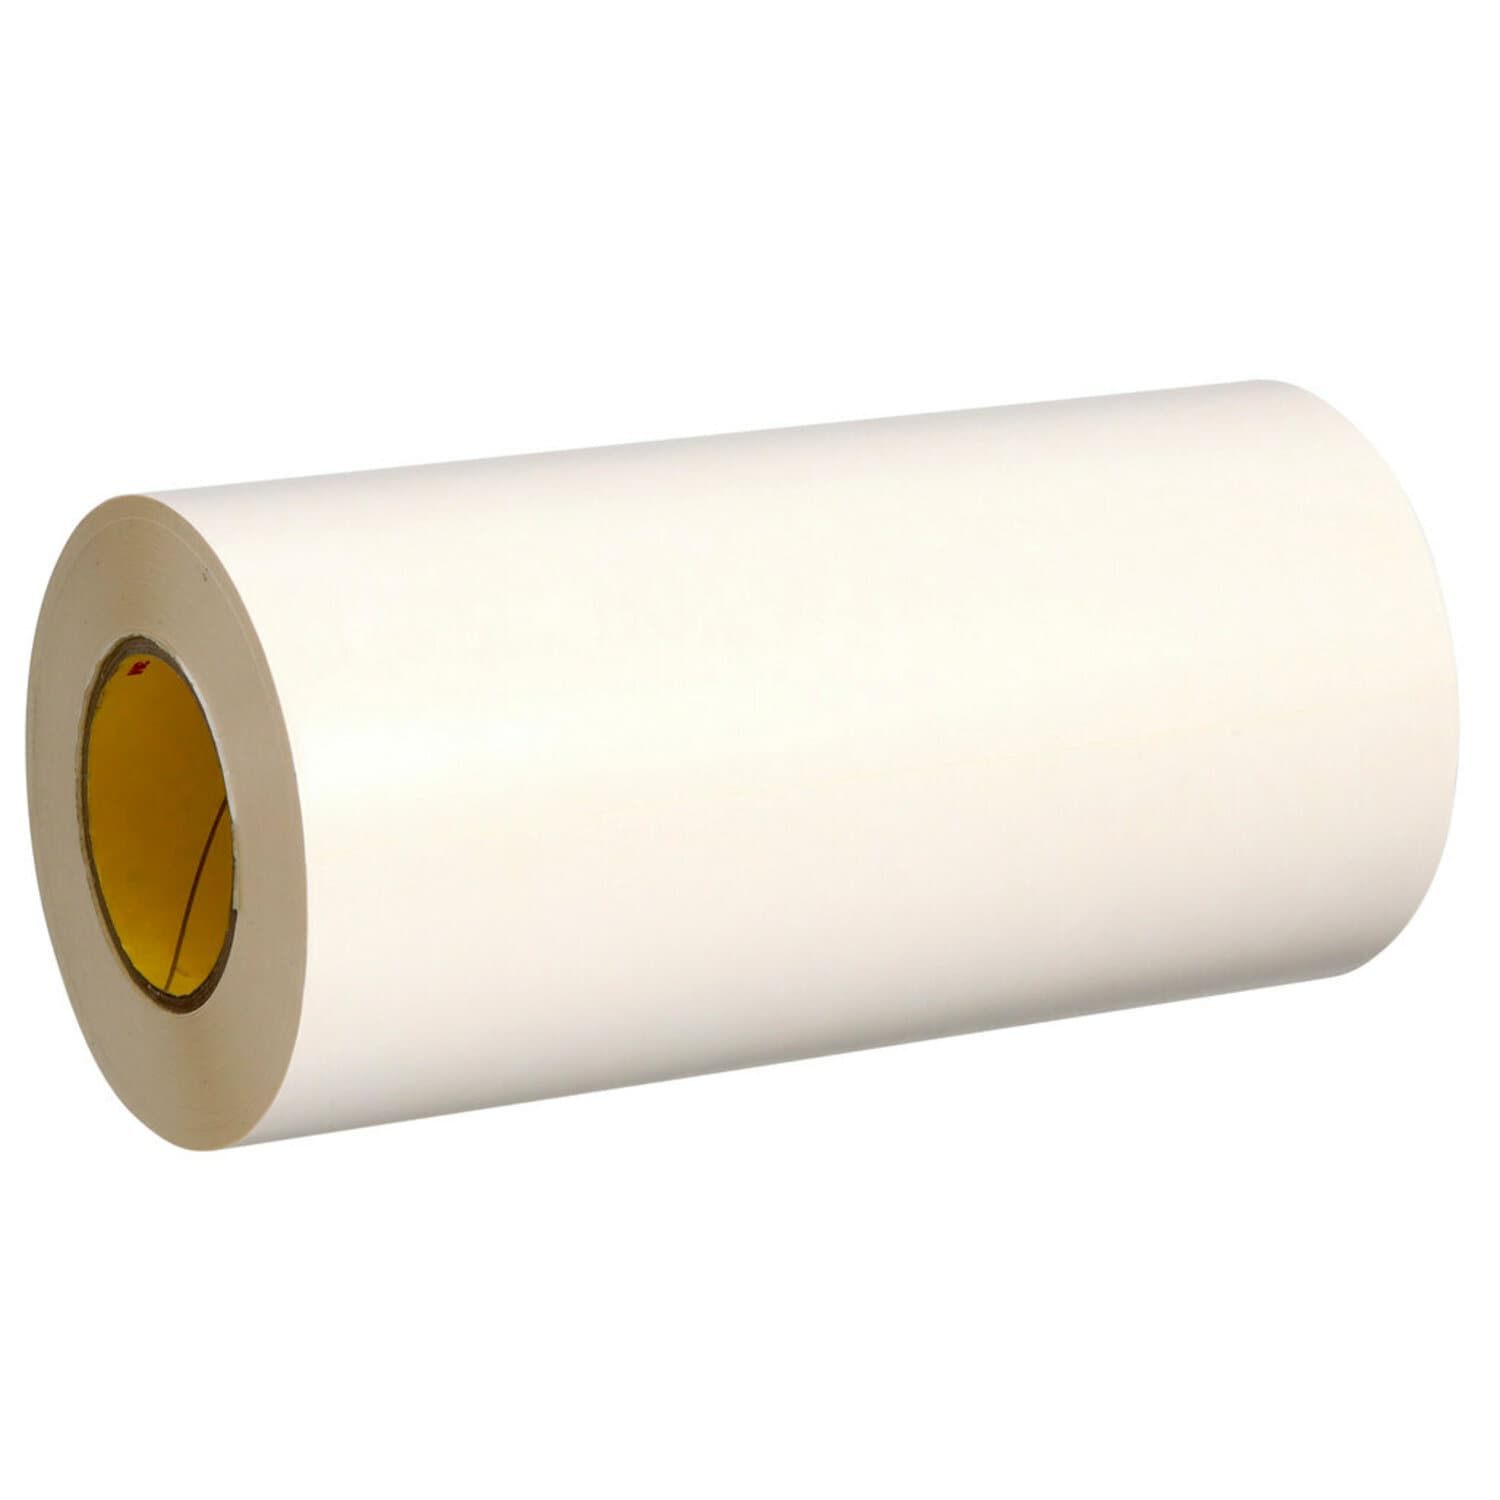 7100171703 - 3M Double Coated Polyester Tape 442KW, 48 in x 36 yds, with No Liner